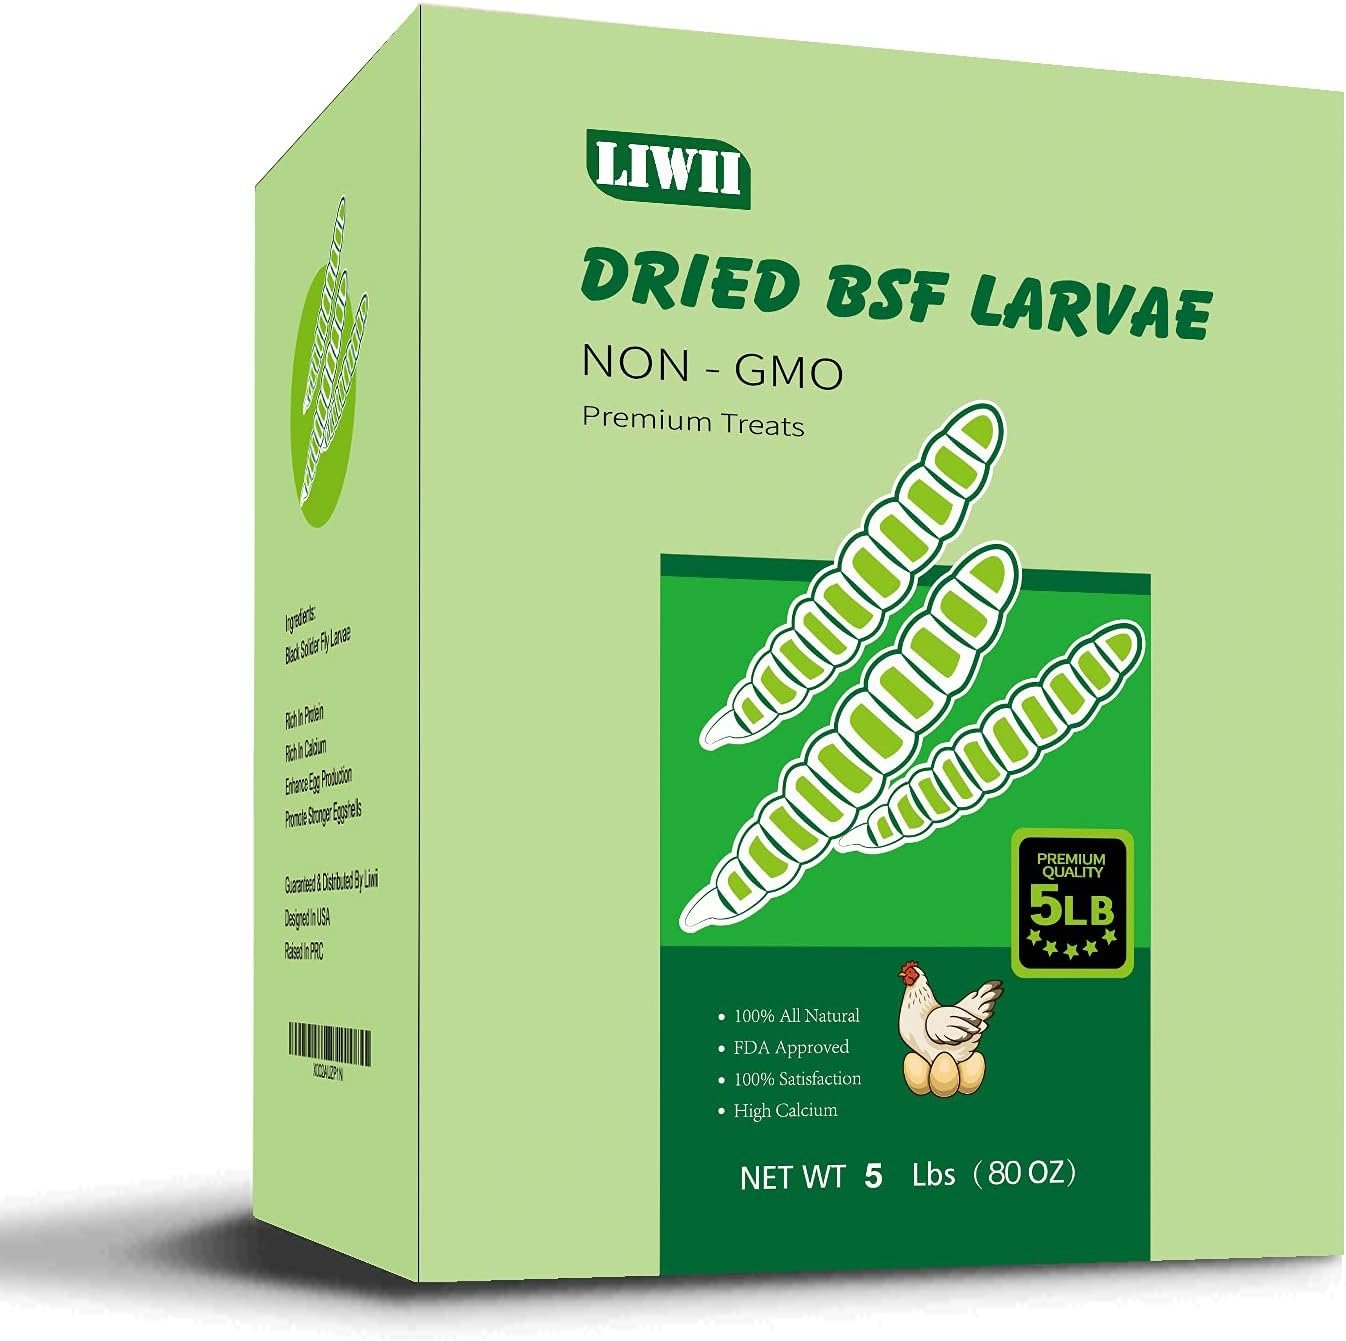 LIWII Dried Black Soldier Fly Larva- 5 LBS-100% Natural Non-GMO Extra Calcium  Protein Compare with Dried Mealworms, Chicken Treats, Bearded Dragon Food, Wild Birds, Hedgehog, Turtles, Reptile Food